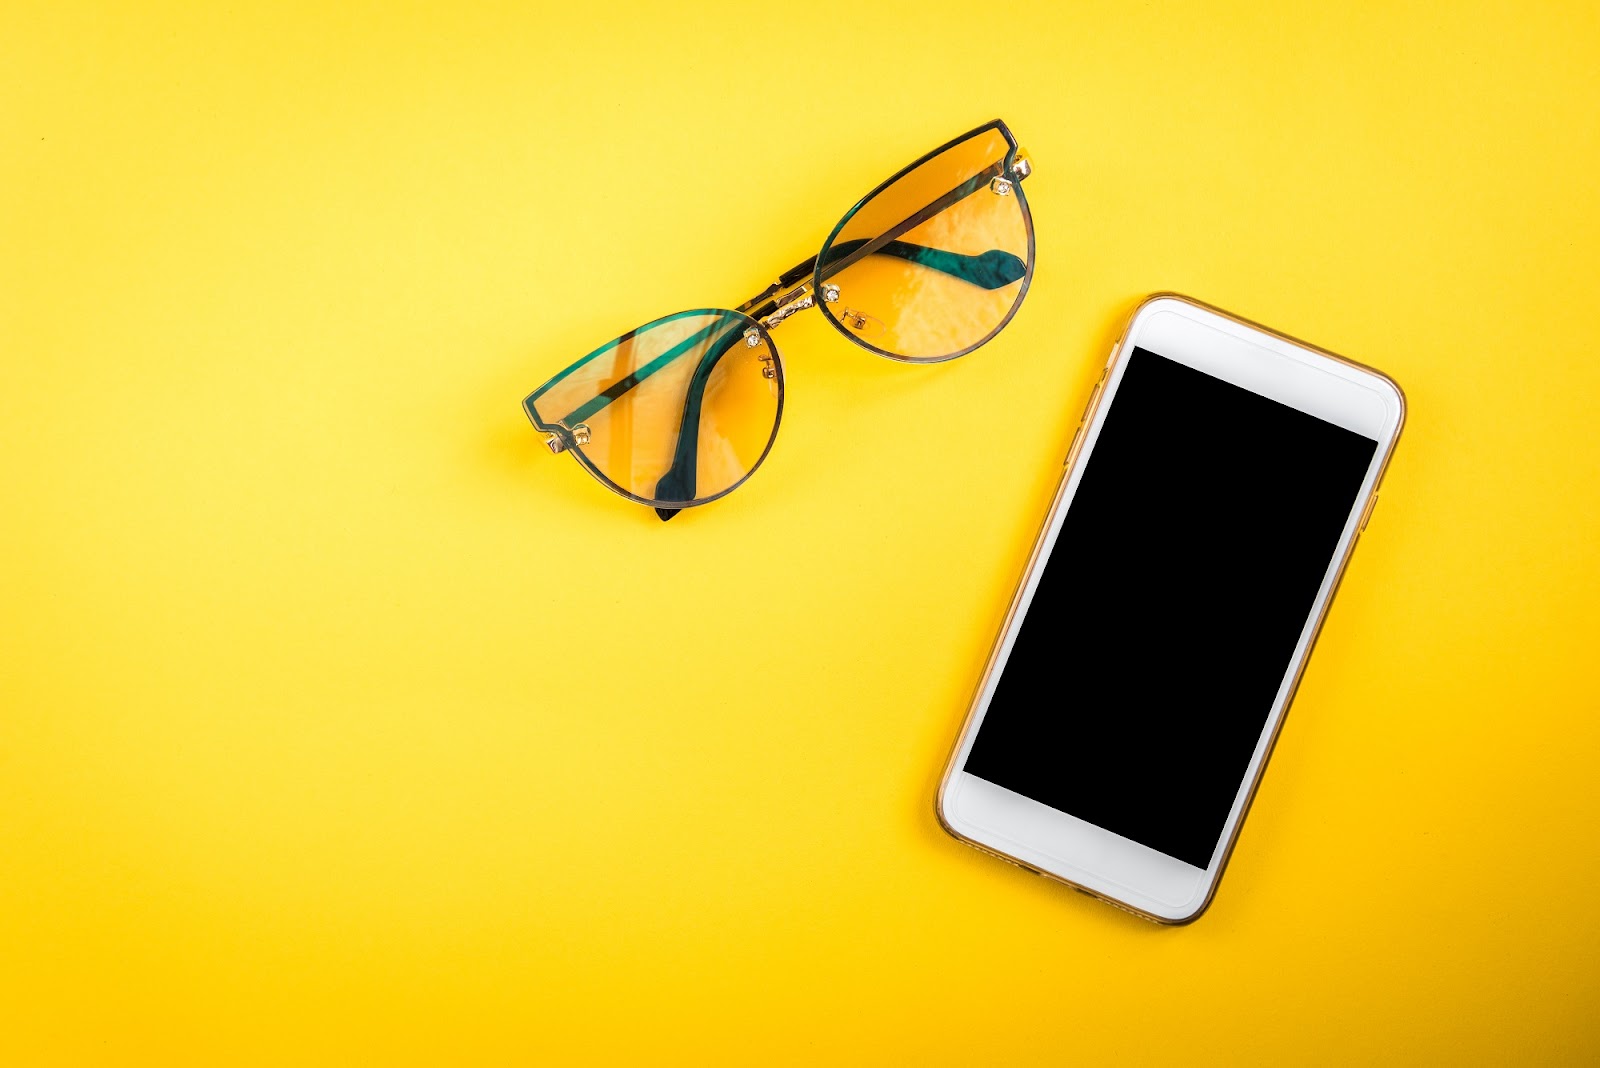 Mobile phone and eye glasses on a yellow background